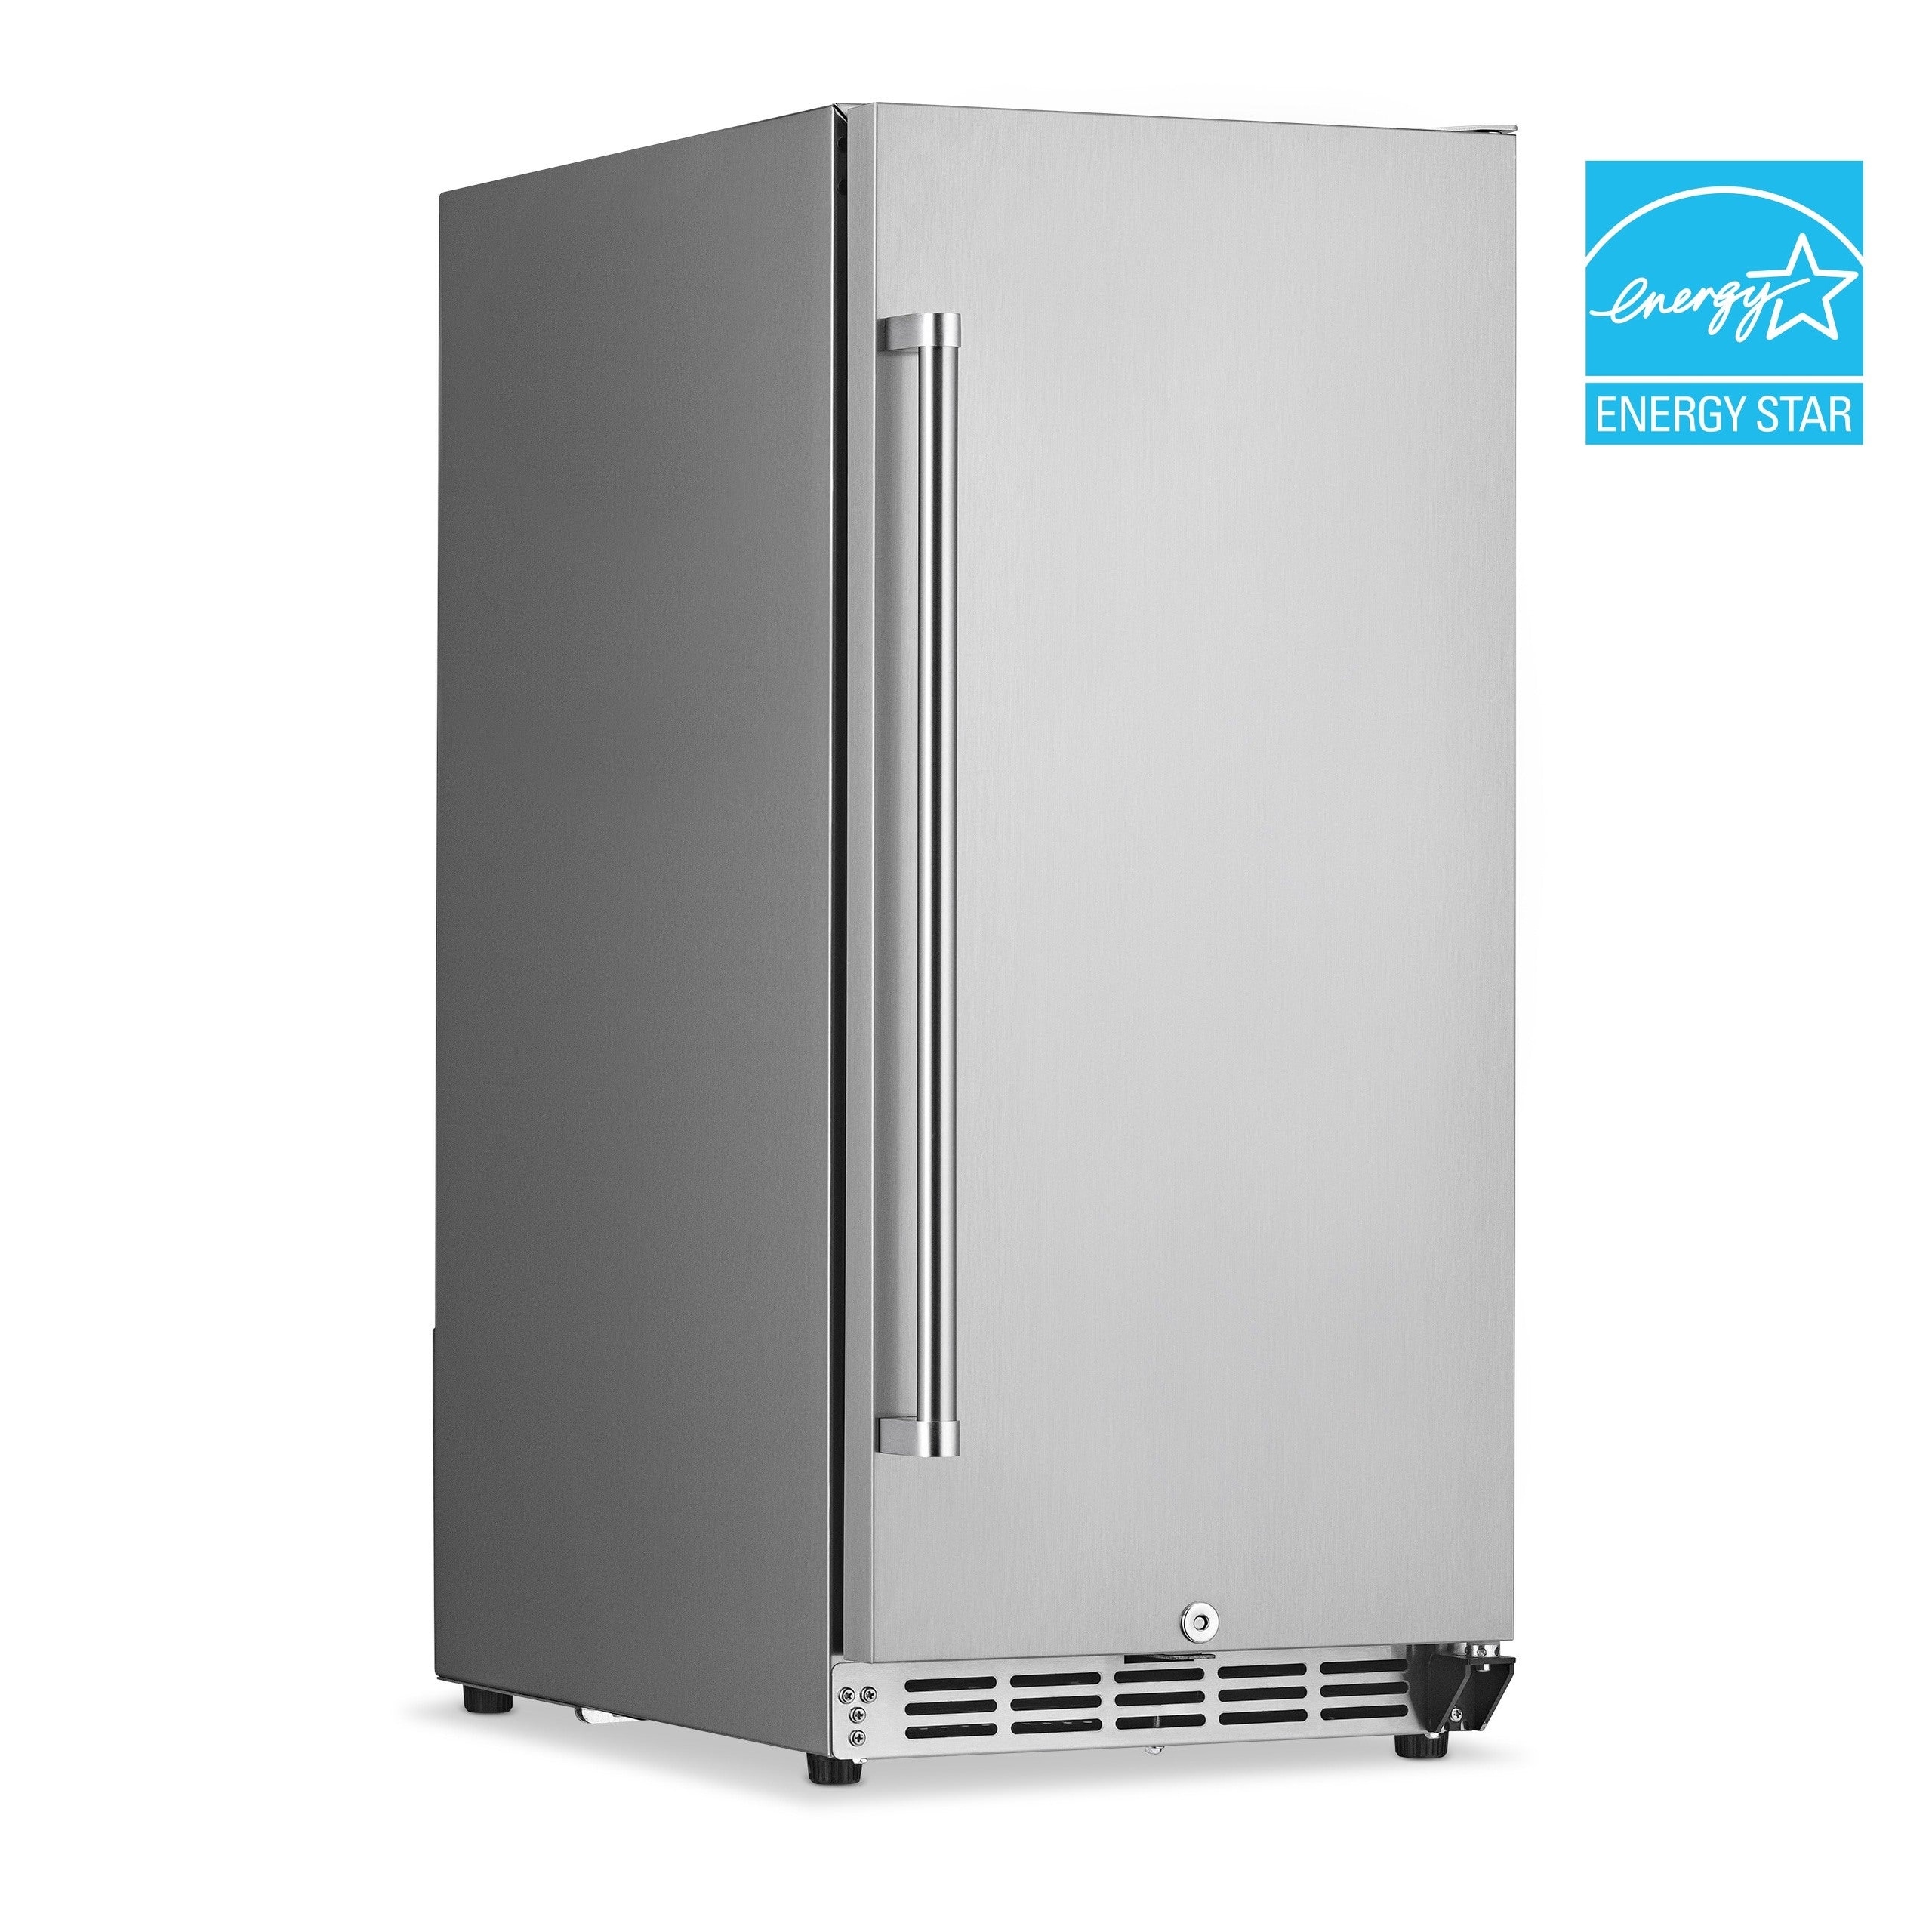 NewAir 15 inch 3.2 Cu. Ft. Commercial Stainless Steel Built-in Beverage Refrigerator, Outdoor Rated, ENERGY STAR